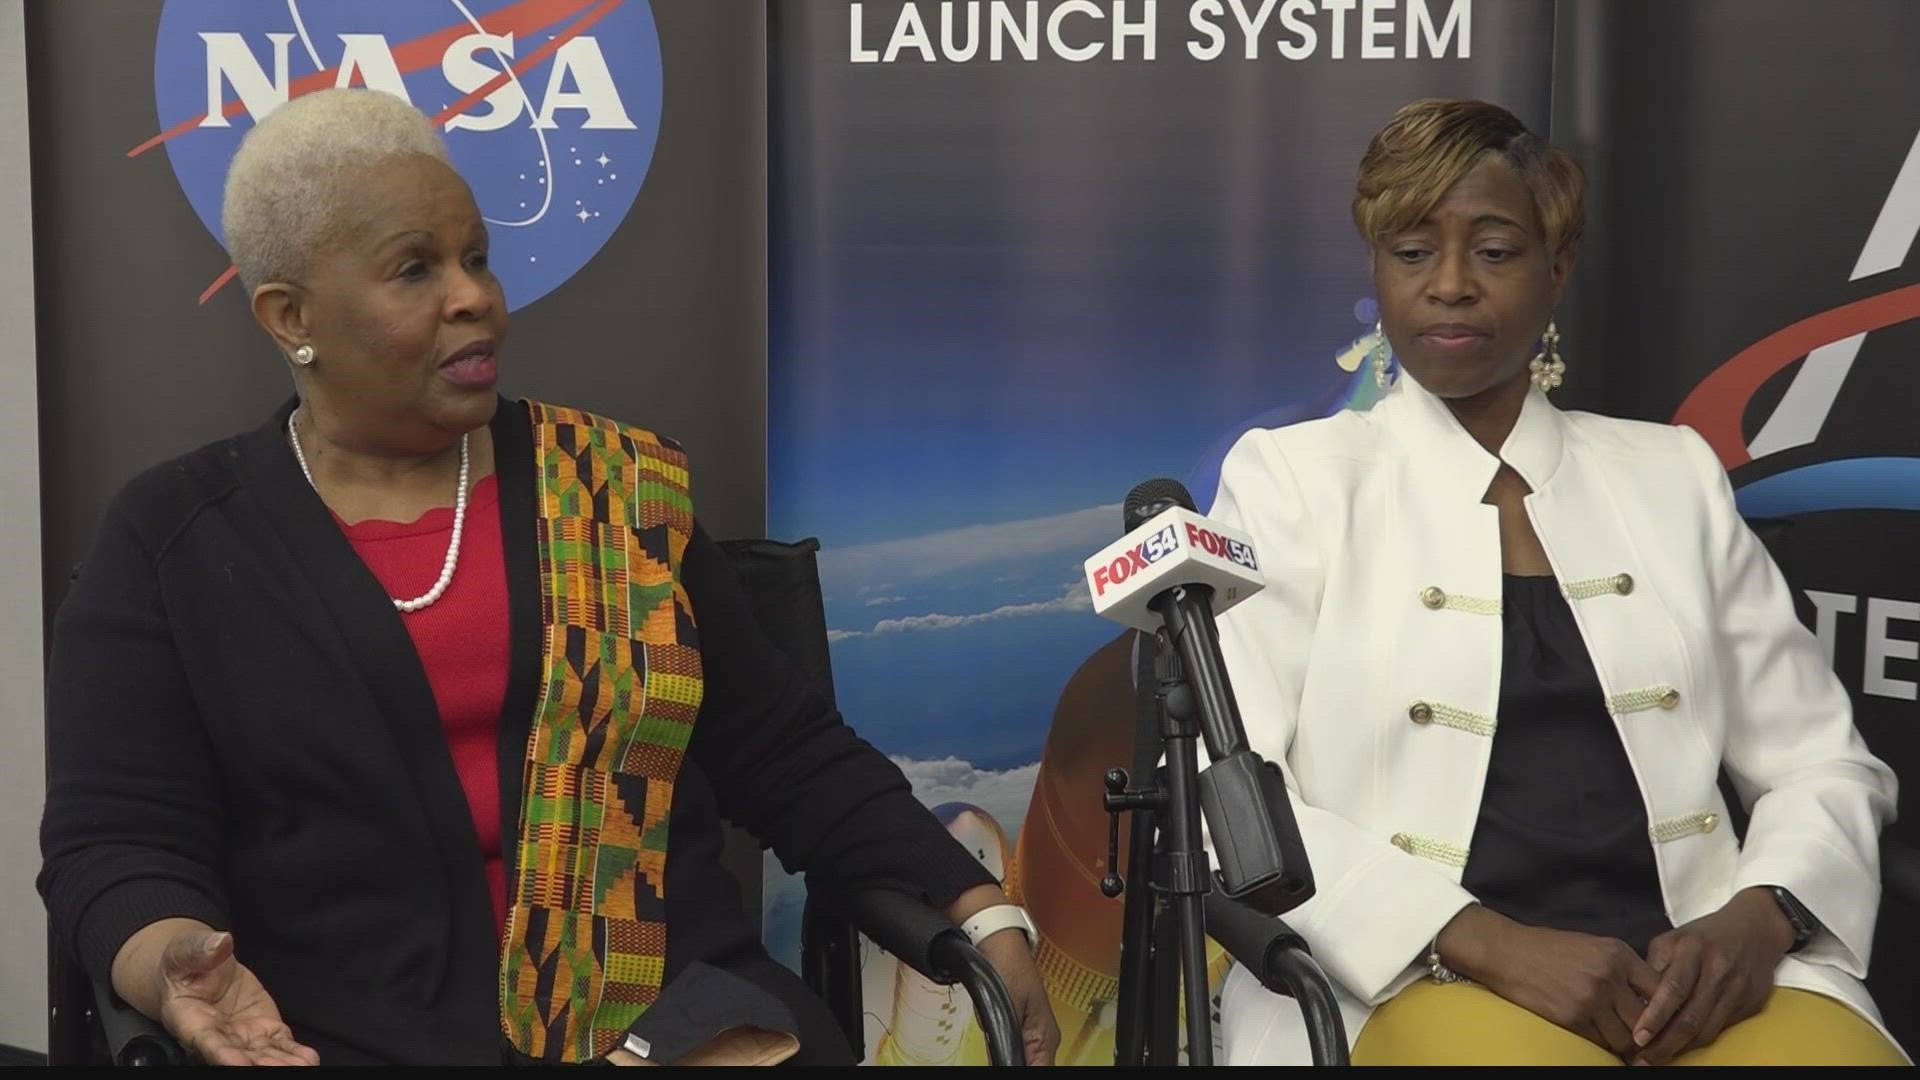 There are countless Black leaders who have contributed to Huntsville's space program throughout its history.